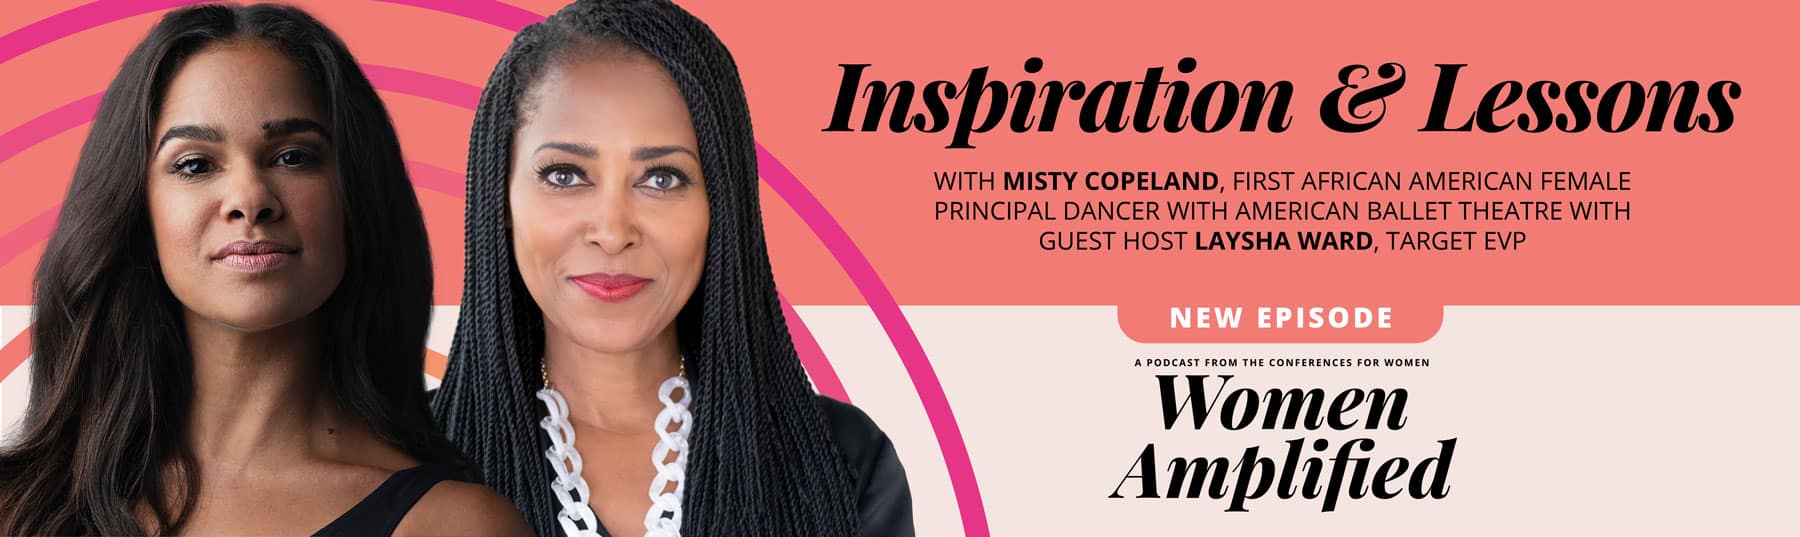 Inspiration and Lessons with Misty Copeland and Laysha Ward | Women Amplified podcast